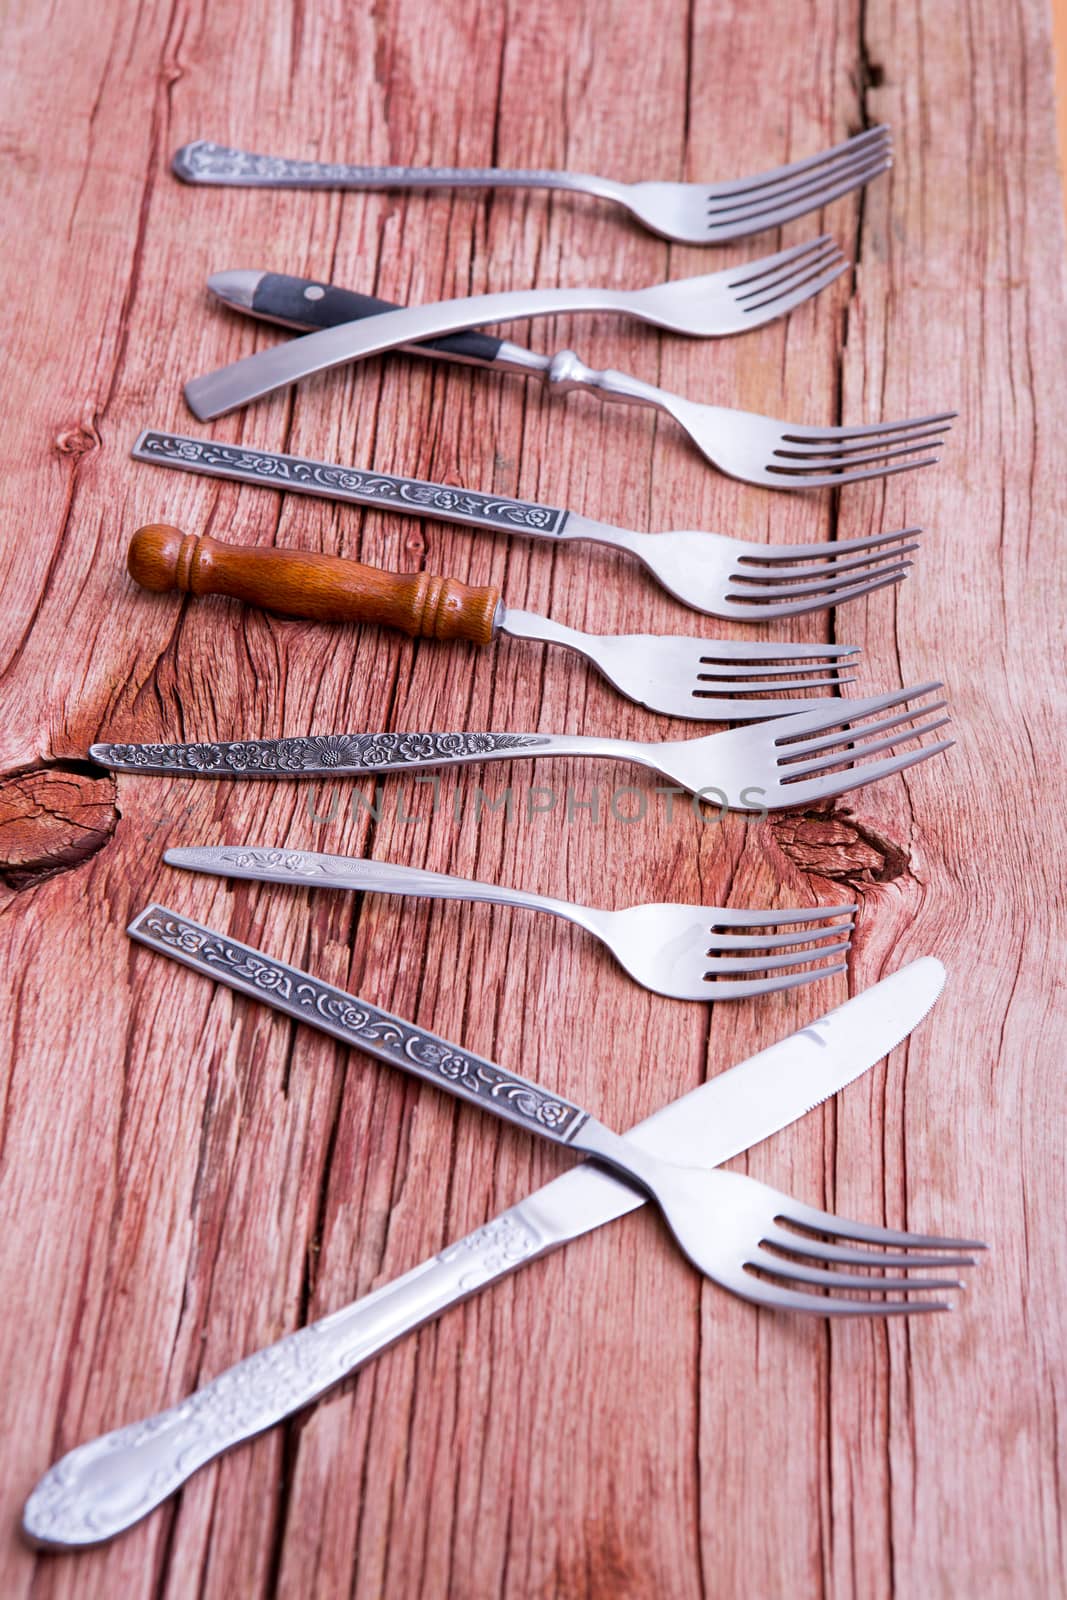 Array of rustic forks and a single knife by coskun